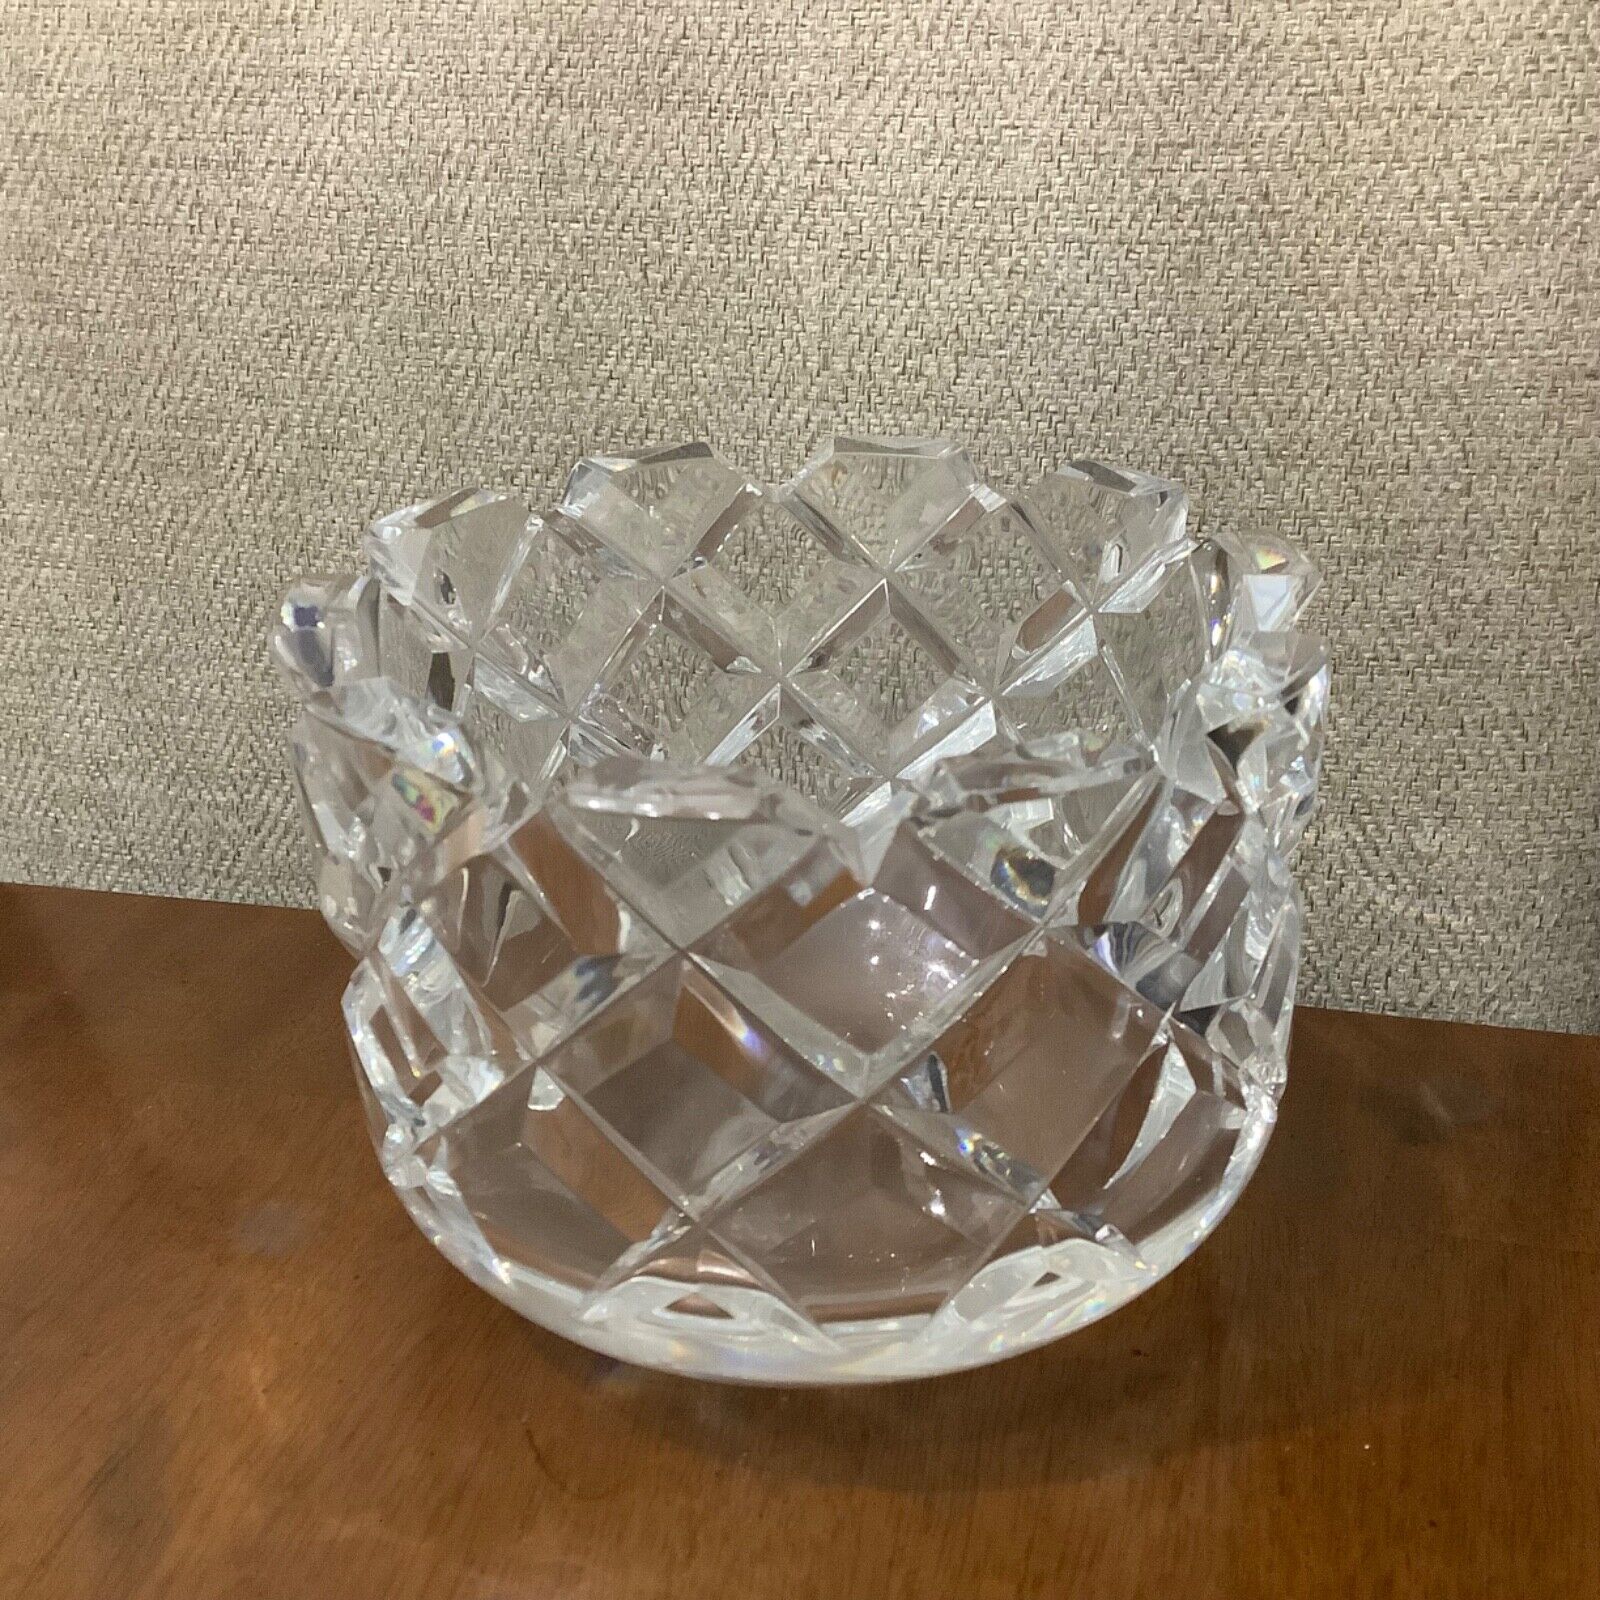 Vintage crystal glass bowl by Orrefors, Sweden, Sofiero Collection